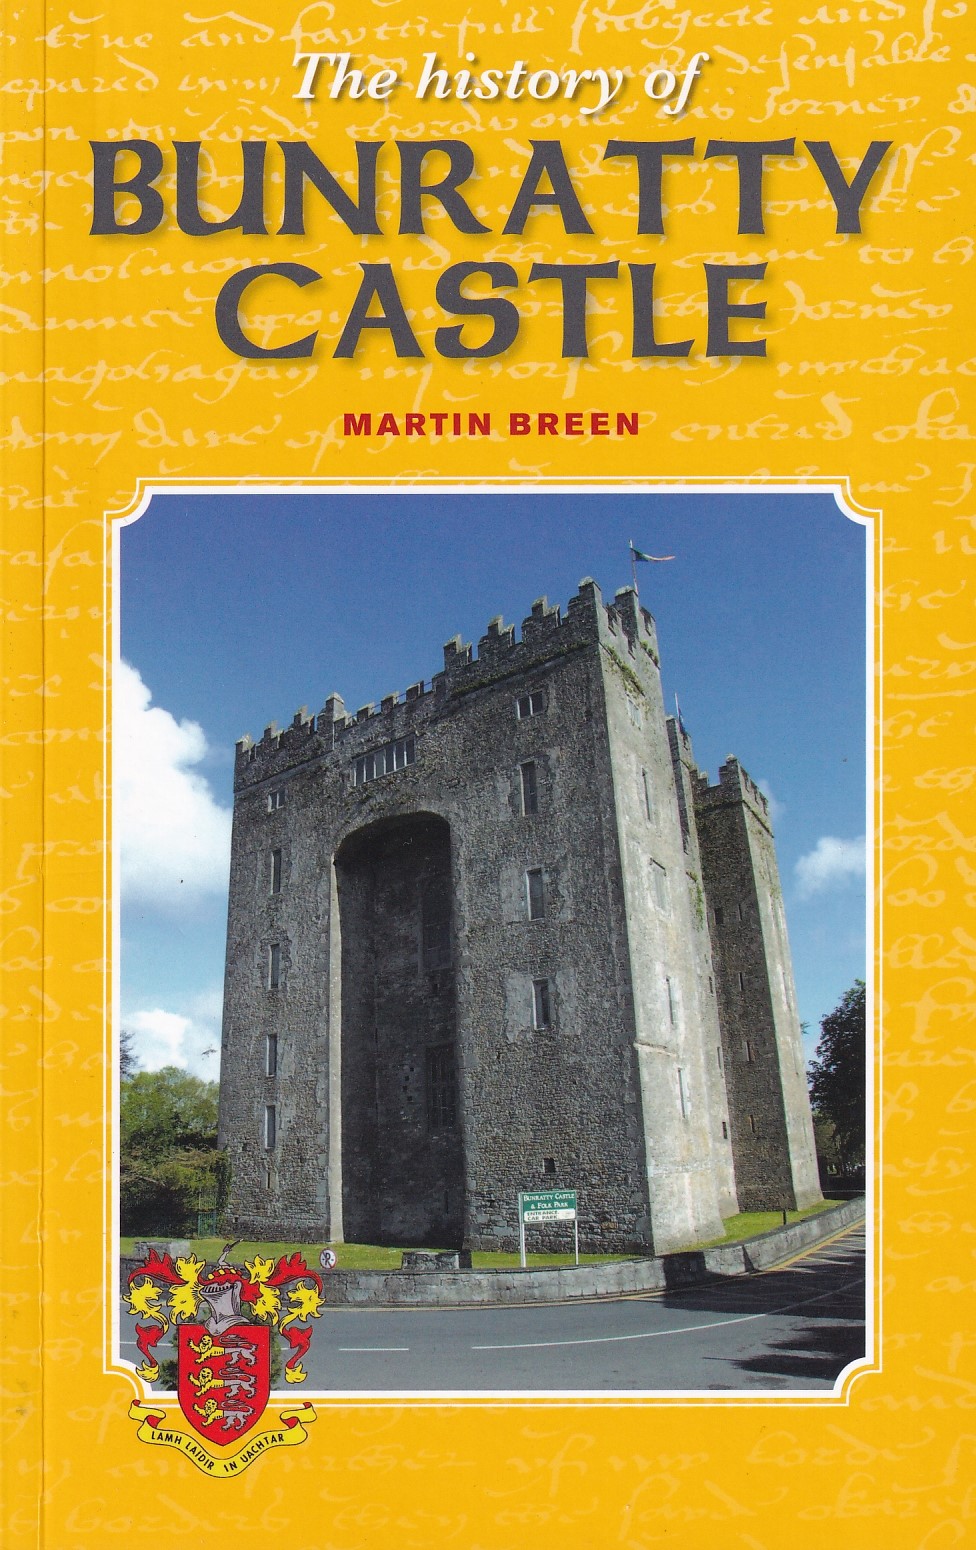 The History of Bunratty Castle | Martin Breen | Charlie Byrne's